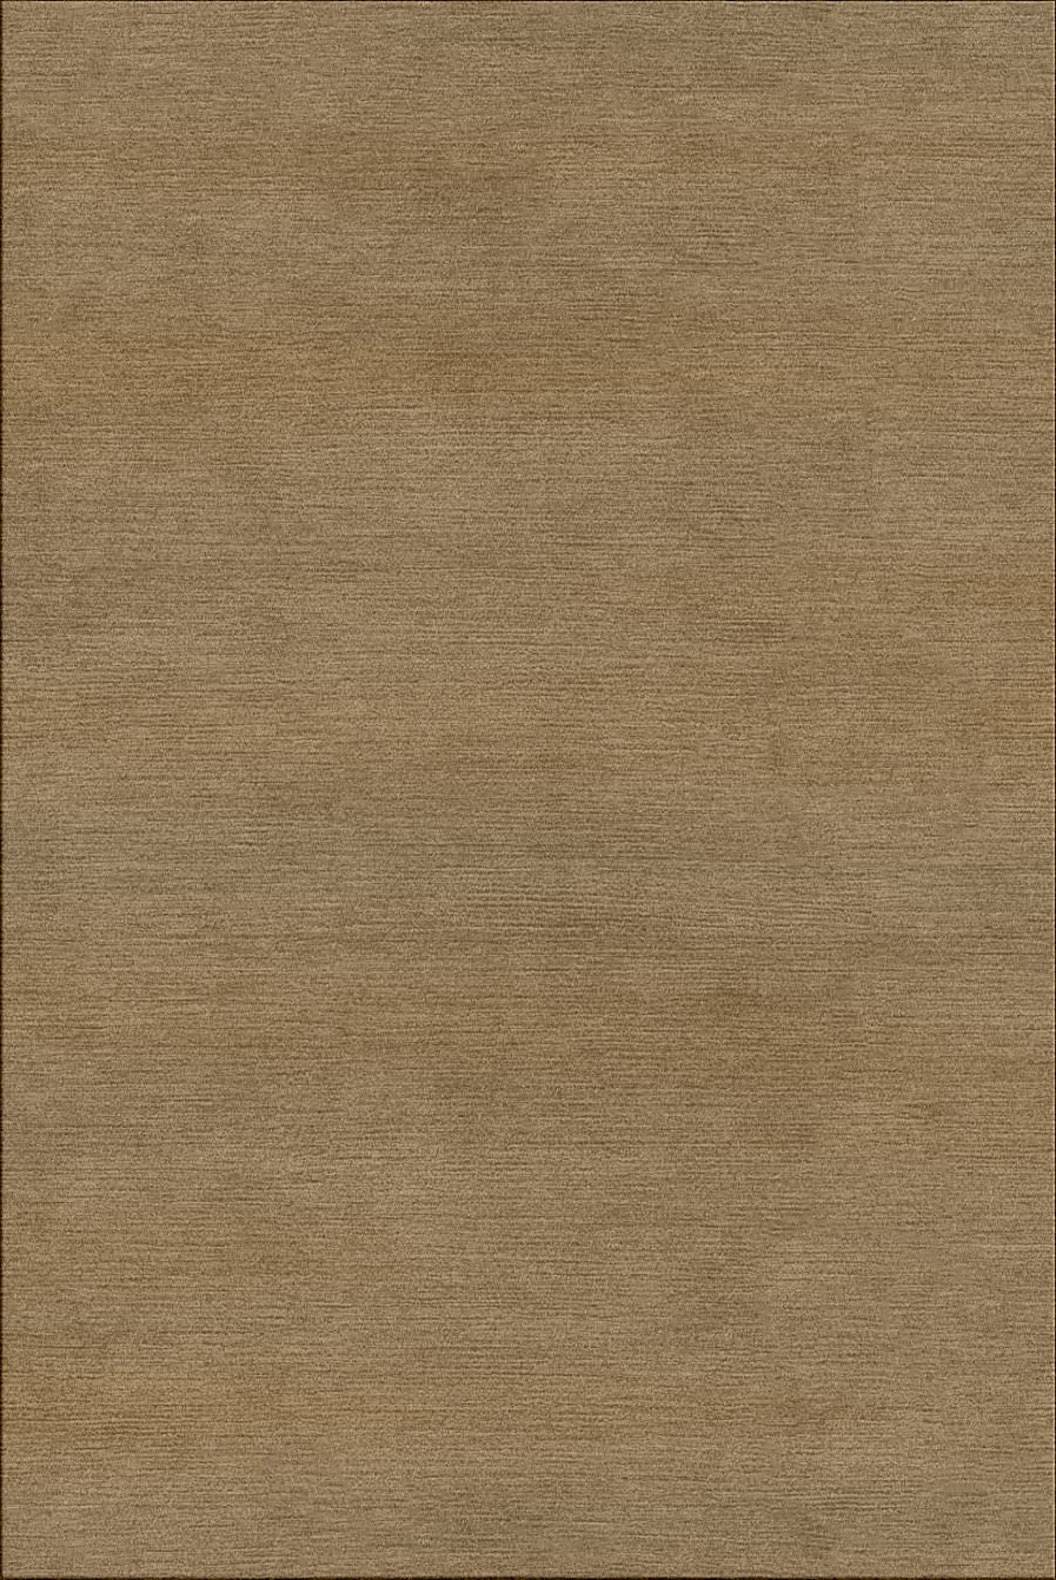 Plain Hint of Tweed Rug by Rug Couture 